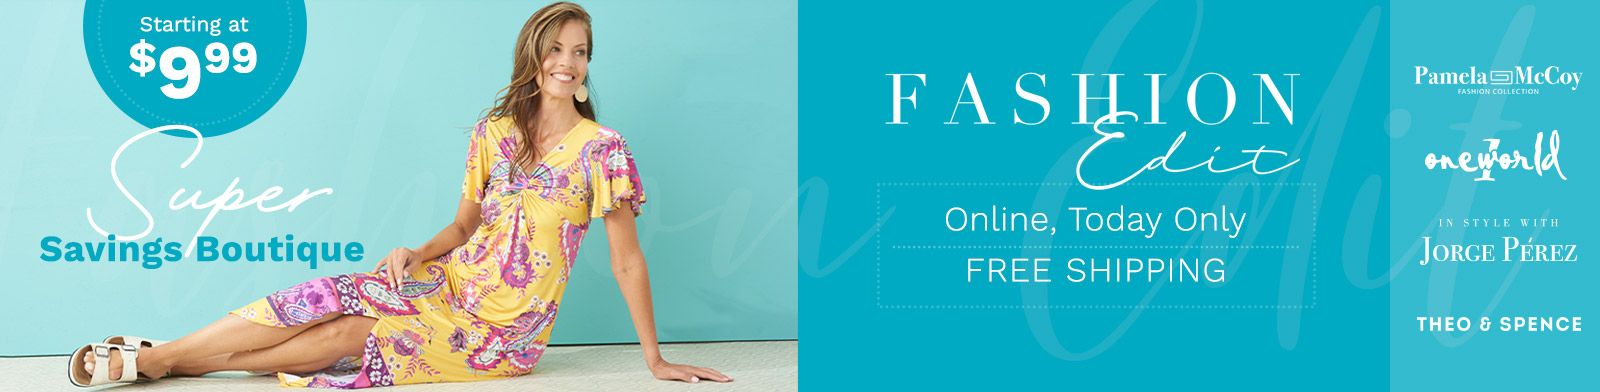 Fashion Edit Online Today Only Super Savings Boutique ft. 746-472